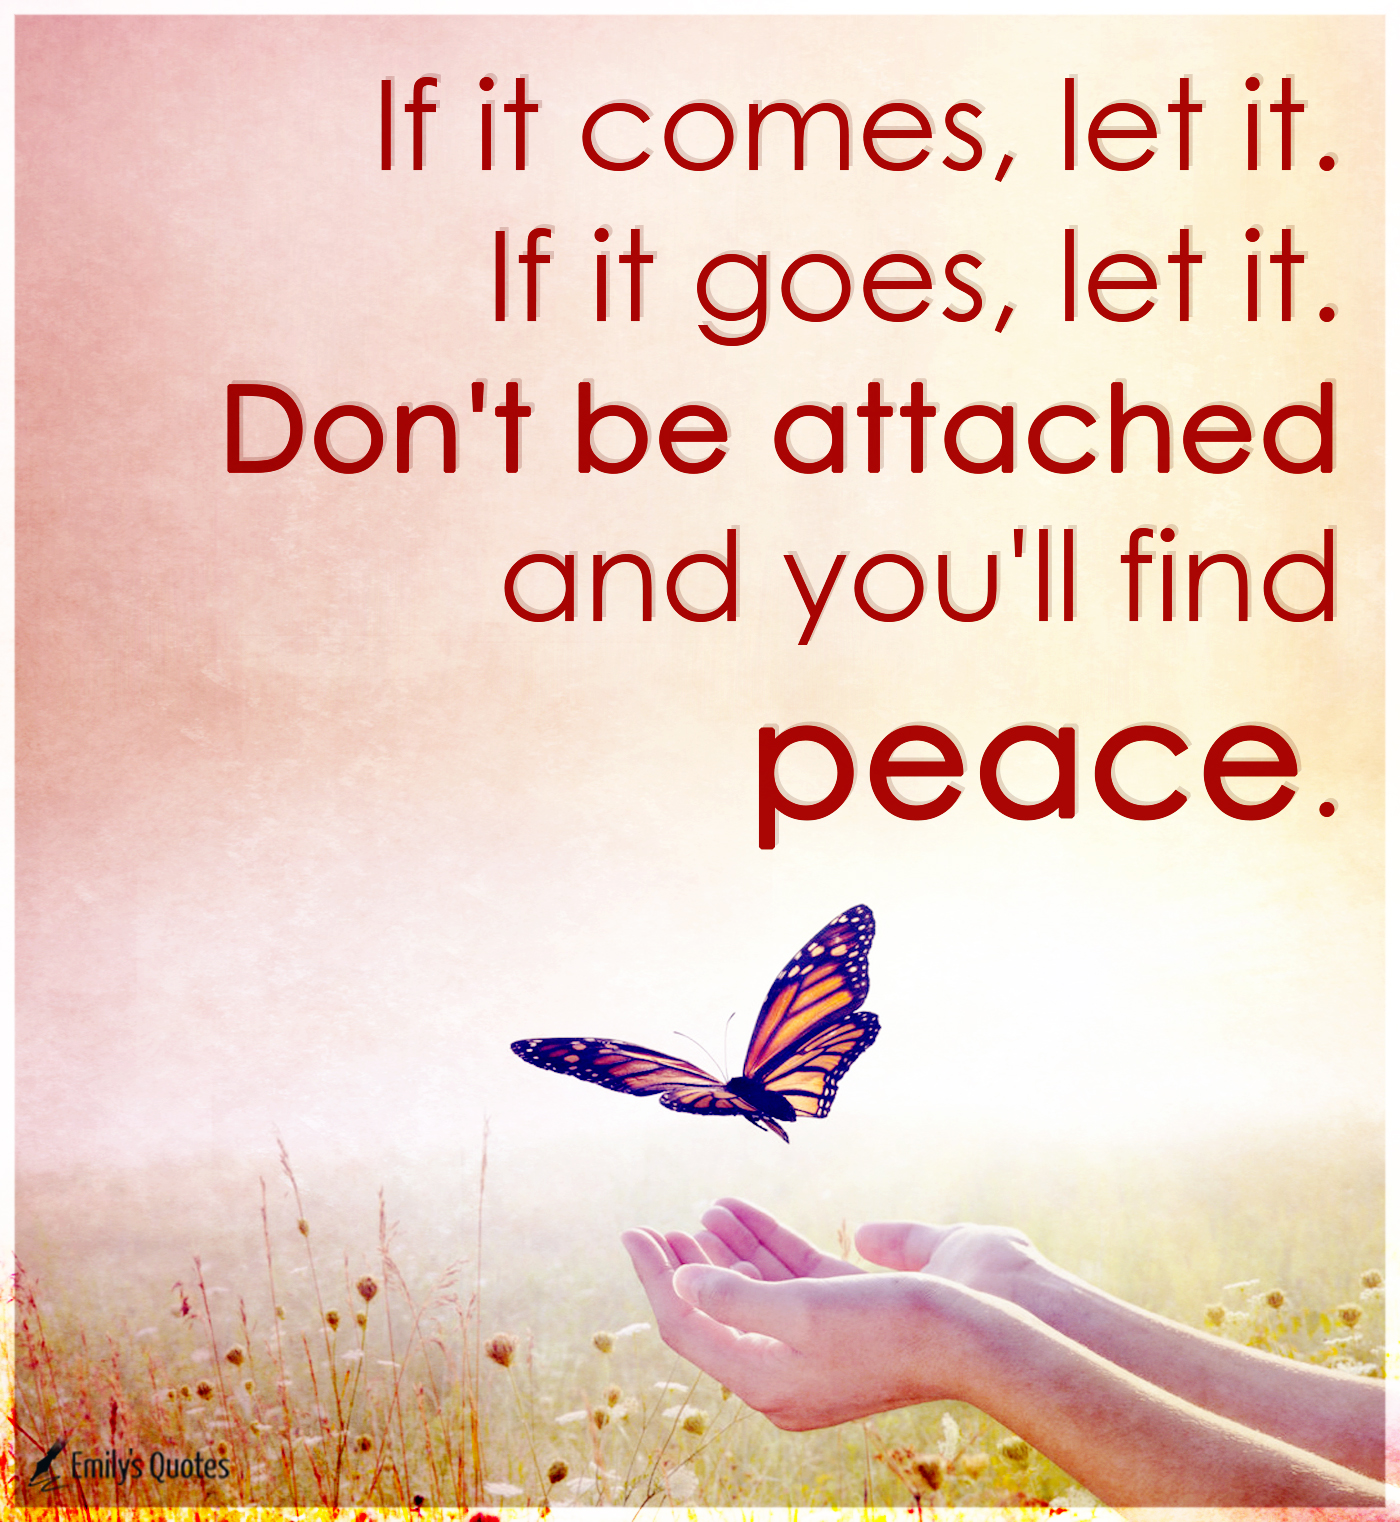 If it comes, let it. If it goes, let it. Don’t be attached and you’ll find peace